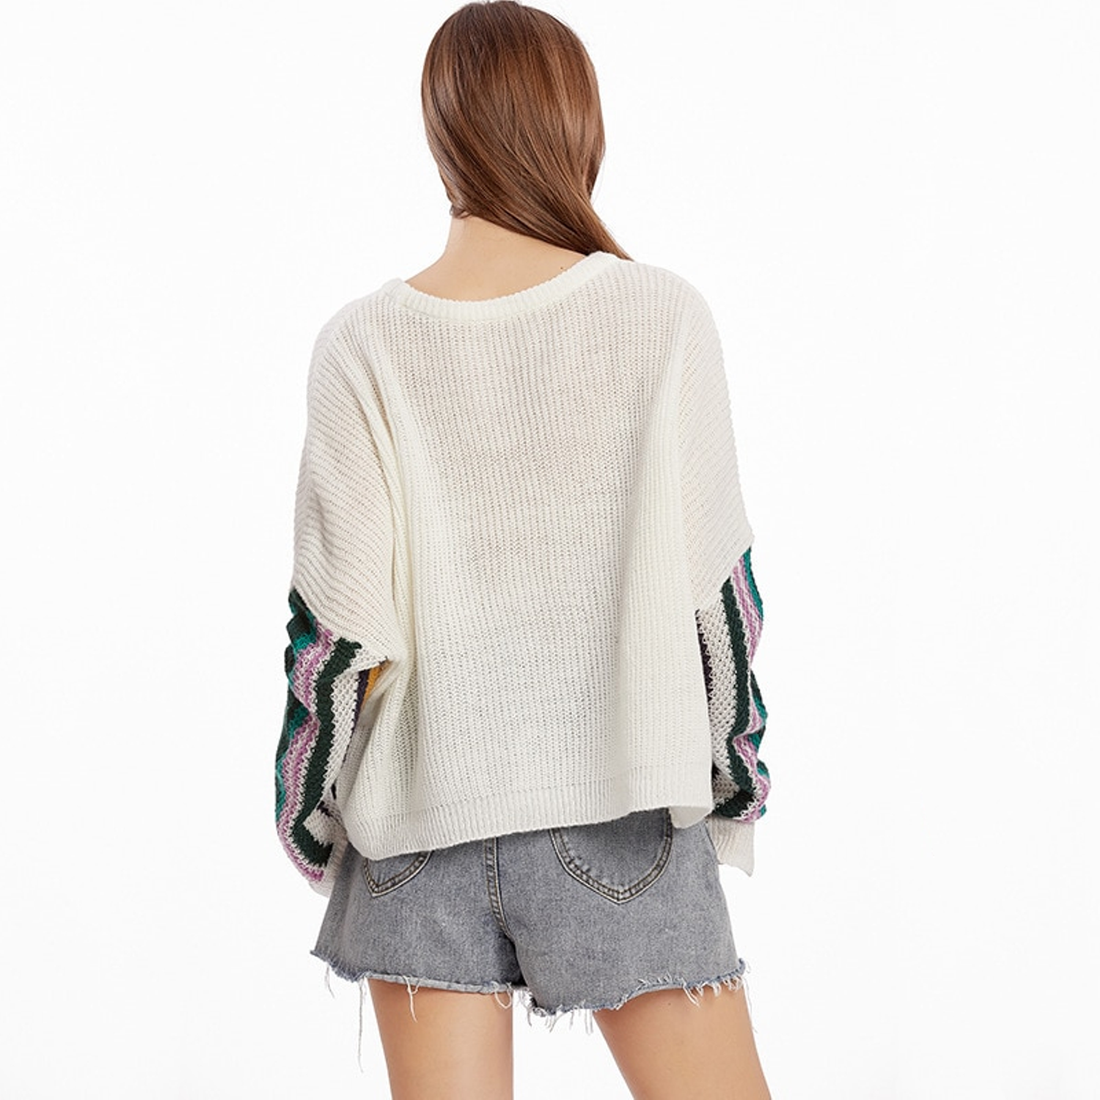 Women's Autumn/Winter Casual Loose Knitted Sweater